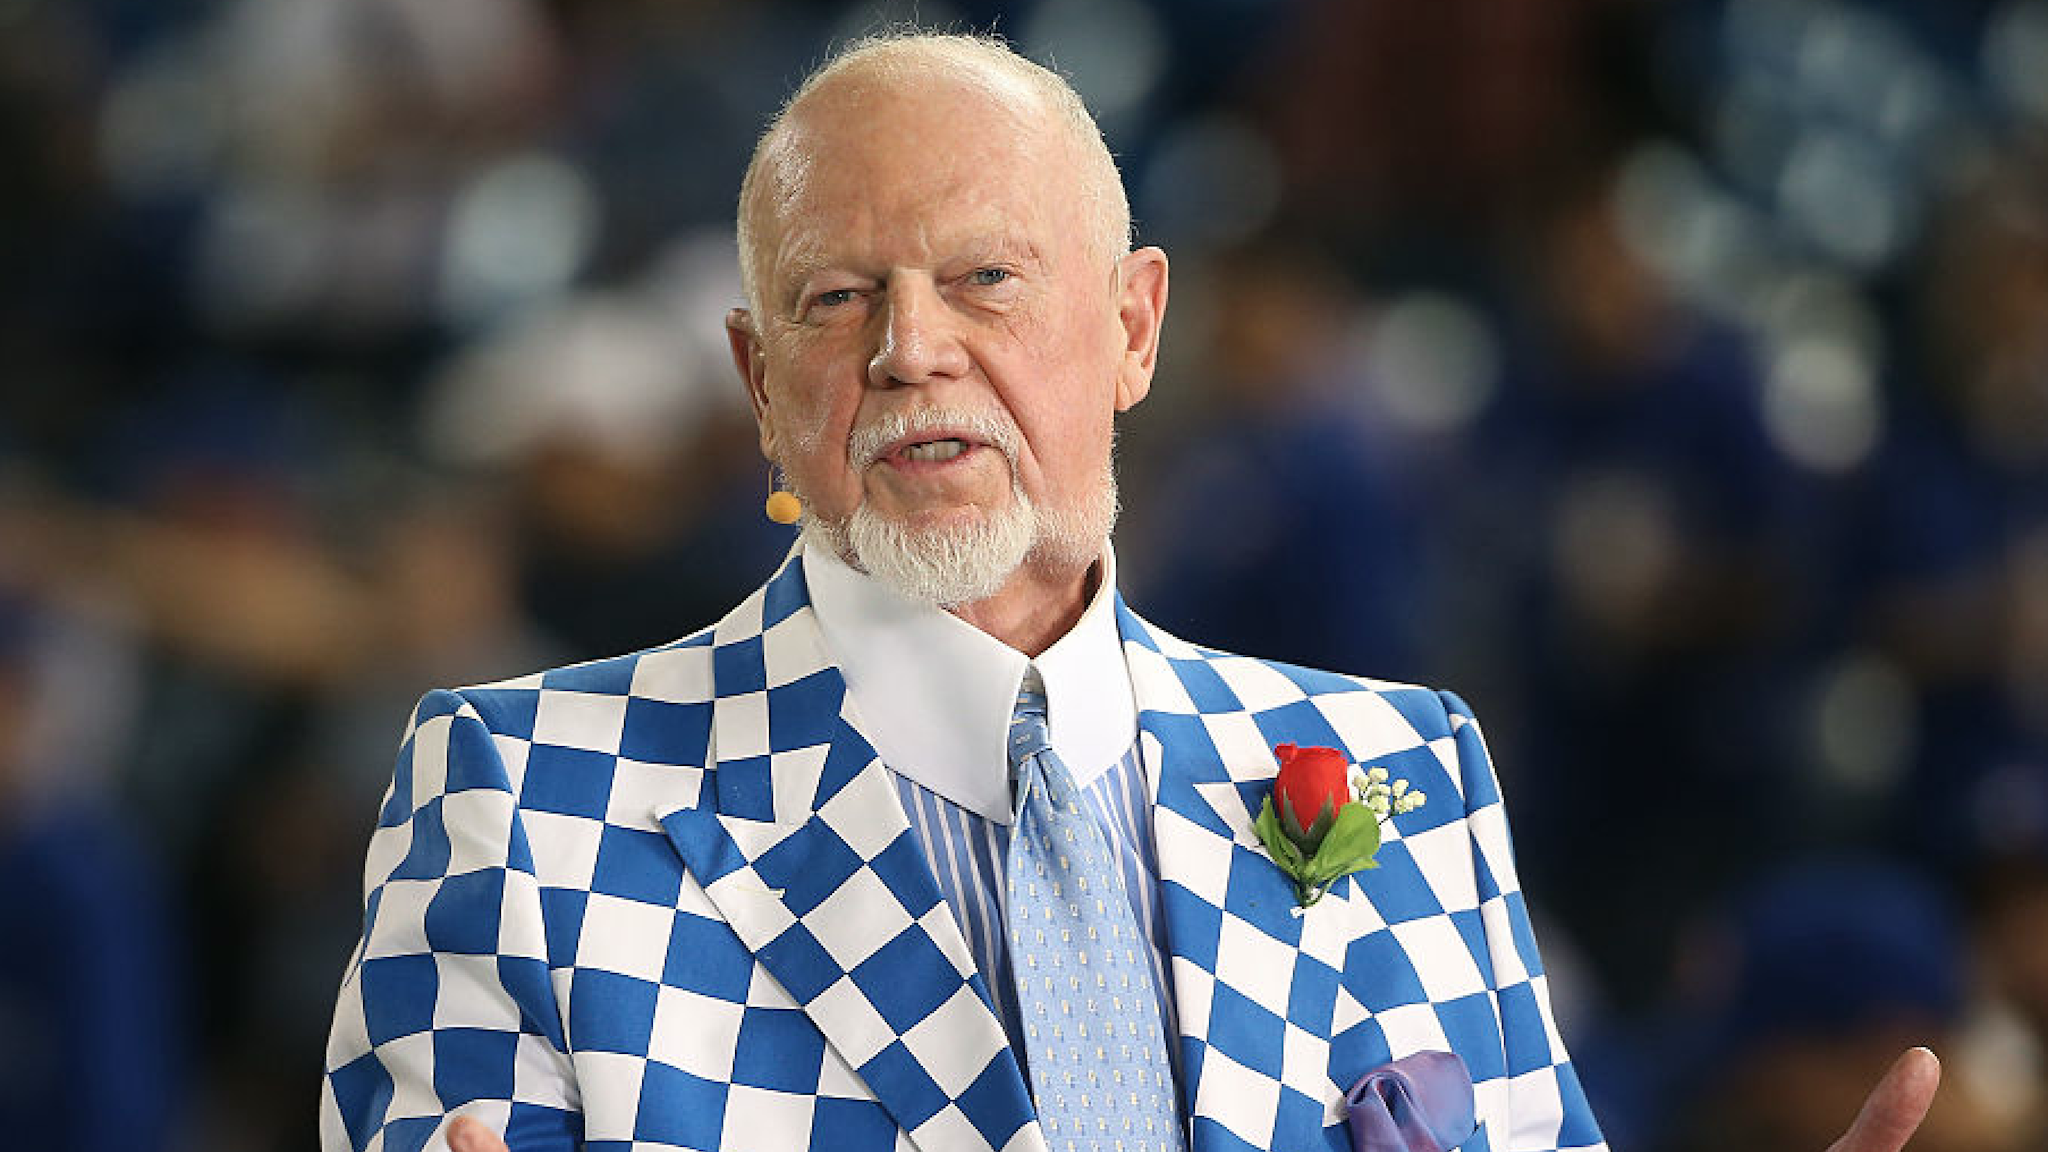 Hockey commentator Don Cherry does a television interview before the Tampa Bay Rays MLB game against the Toronto Blue Jays on April 13, 2015 at Rogers Centre in Toronto, Ontario, Canada.